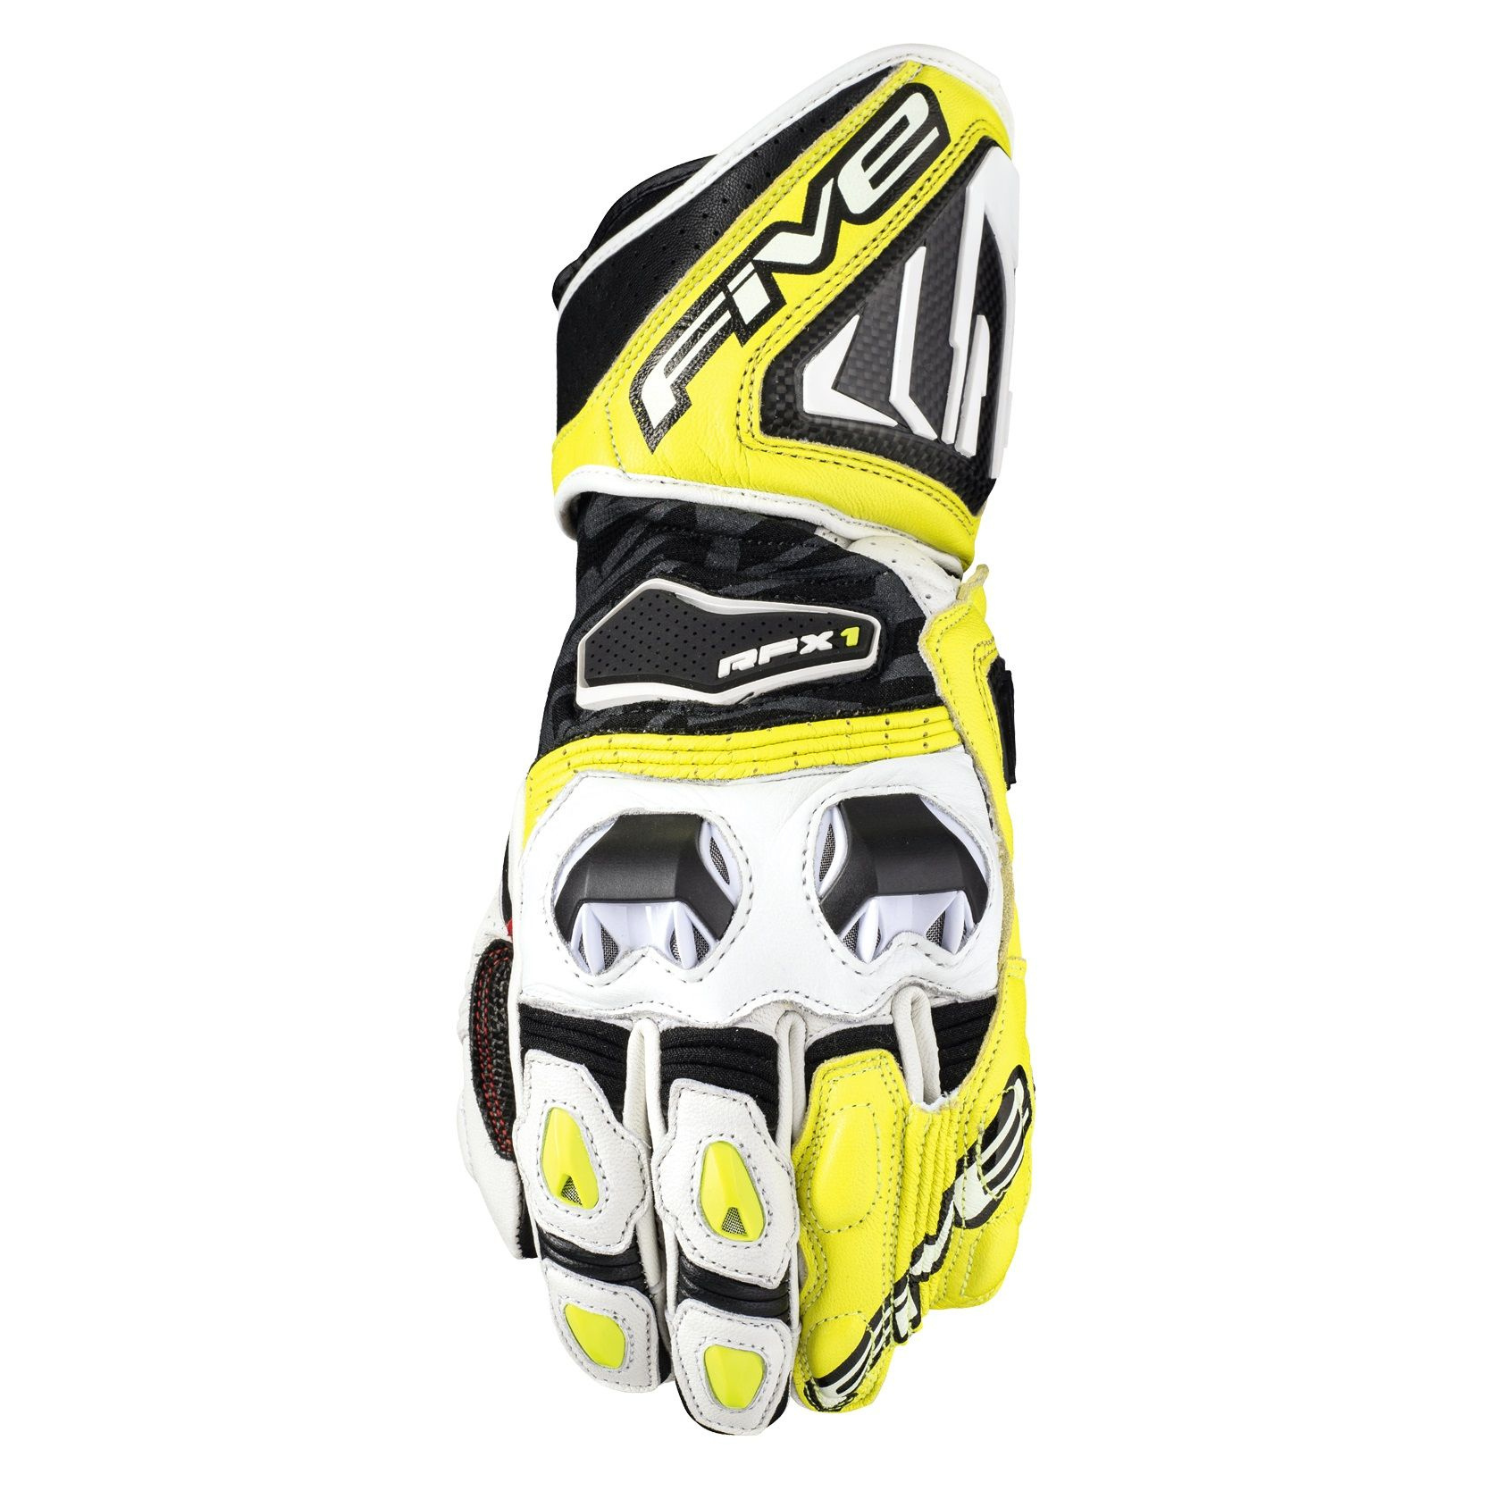 Image of Five RFX1 Gloves White Yellow Taille 2XL